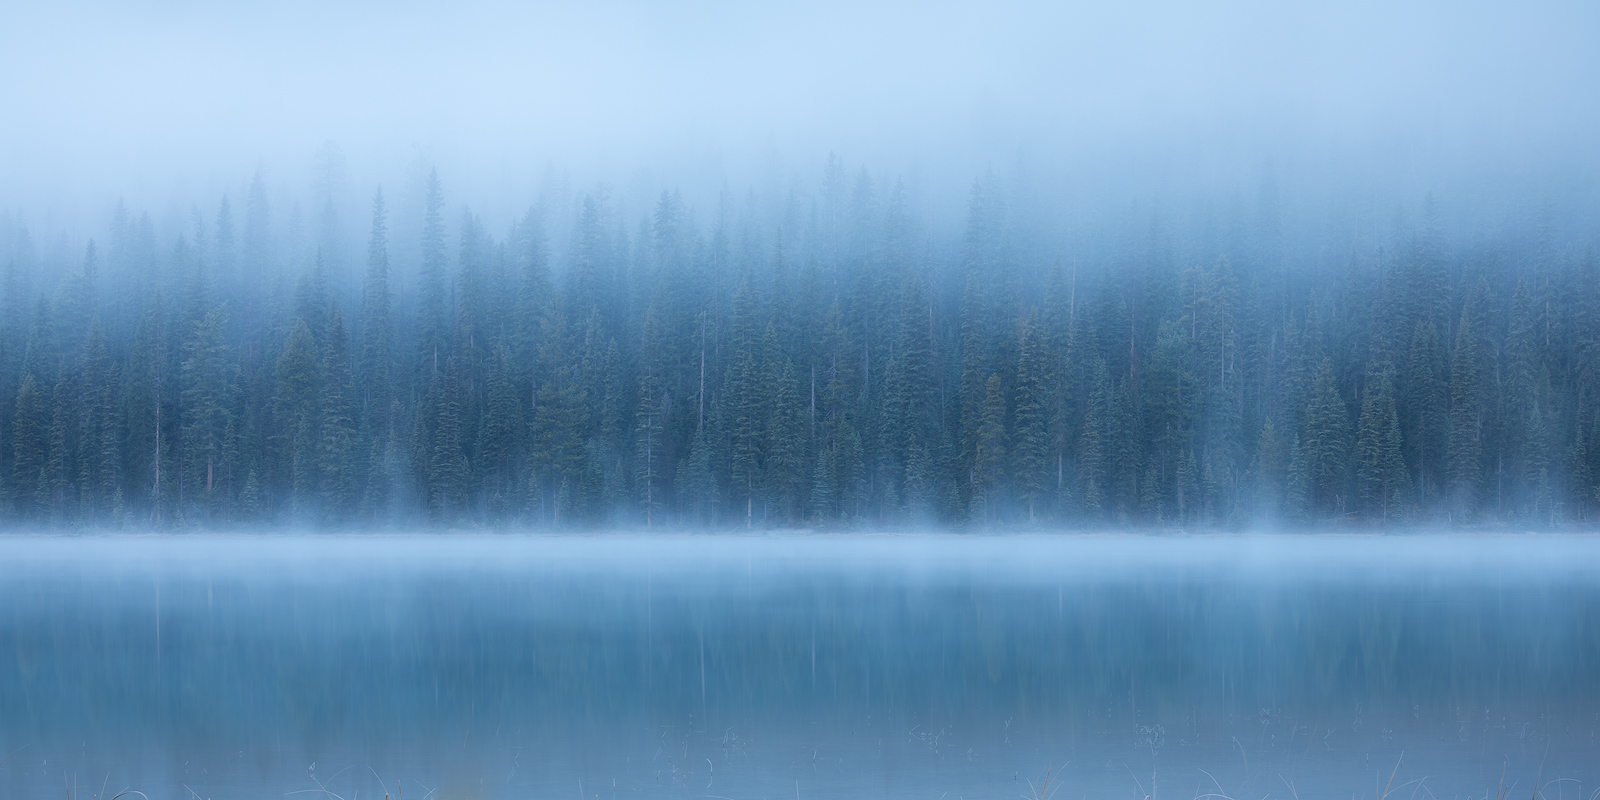 Emerald Lake fogged in on a cold Winter morning.